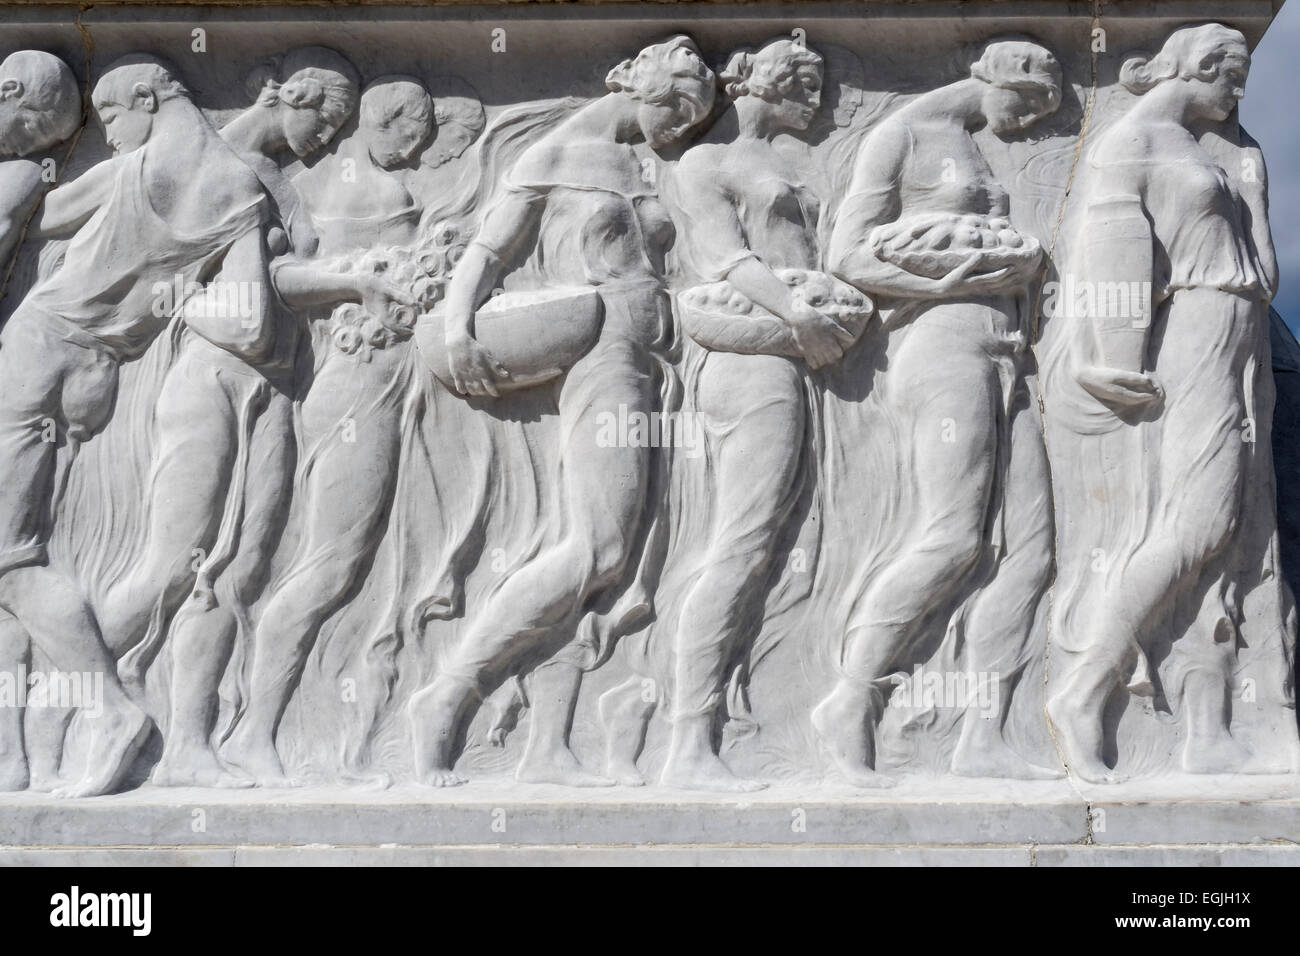 Detail of figures sculpted around the base of the General Maximo Gomez monument, Parque Martires del 71, Havana, Cuba. Stock Photo